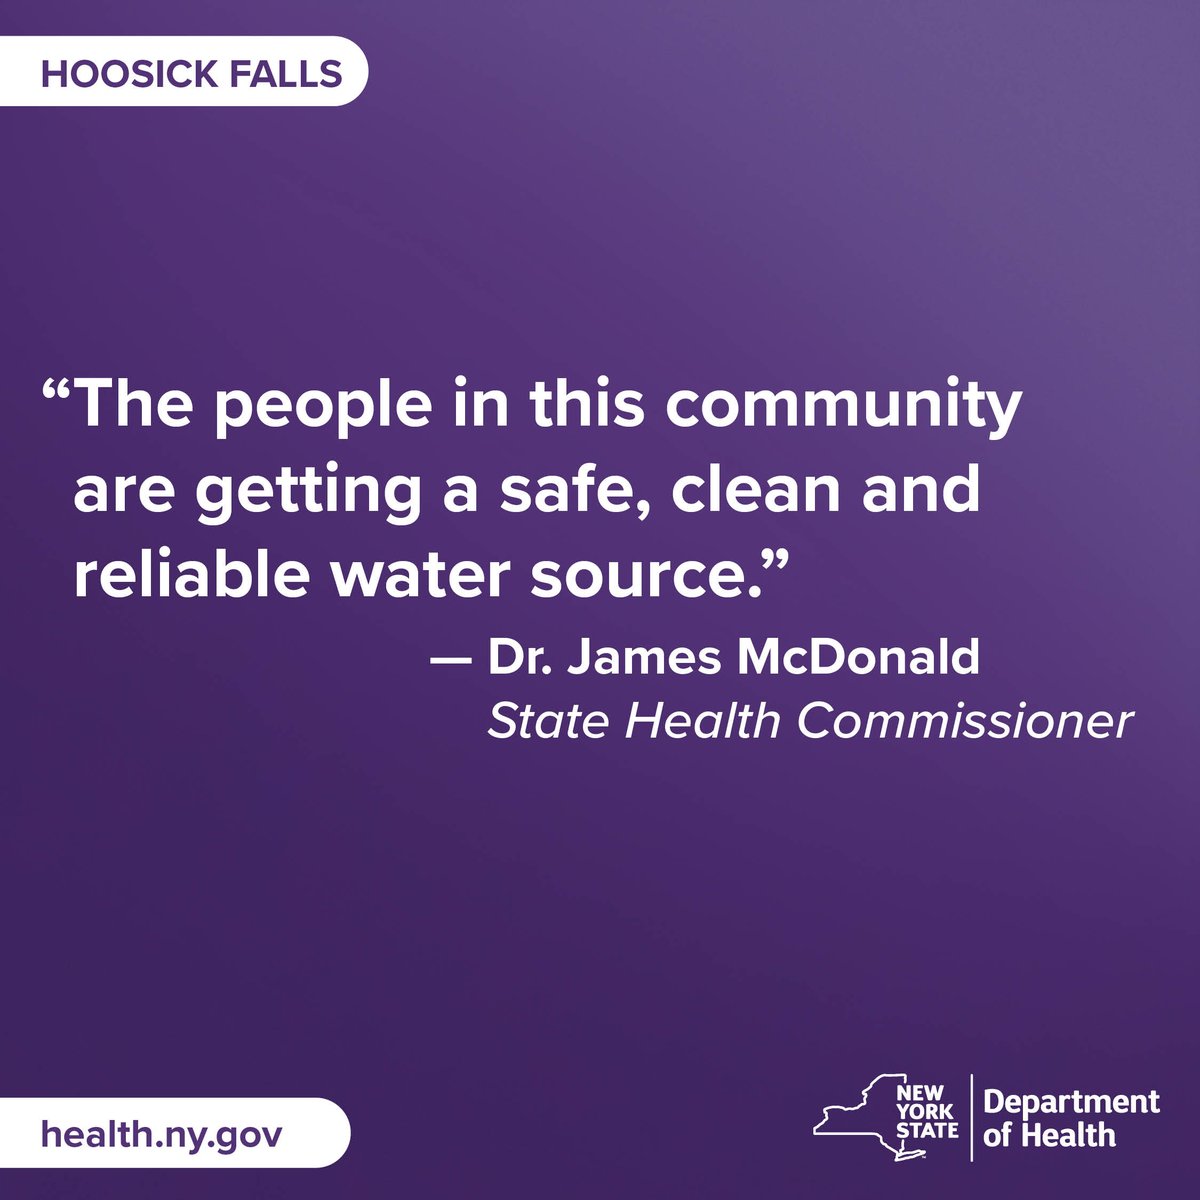 The Department will continue to collaborate with our partners to monitor and prioritize public health and to ensure that safe drinking water is available to the Hoosick Falls community for years to come. Learn more about this new State water project: governor.ny.gov/news/governor-…